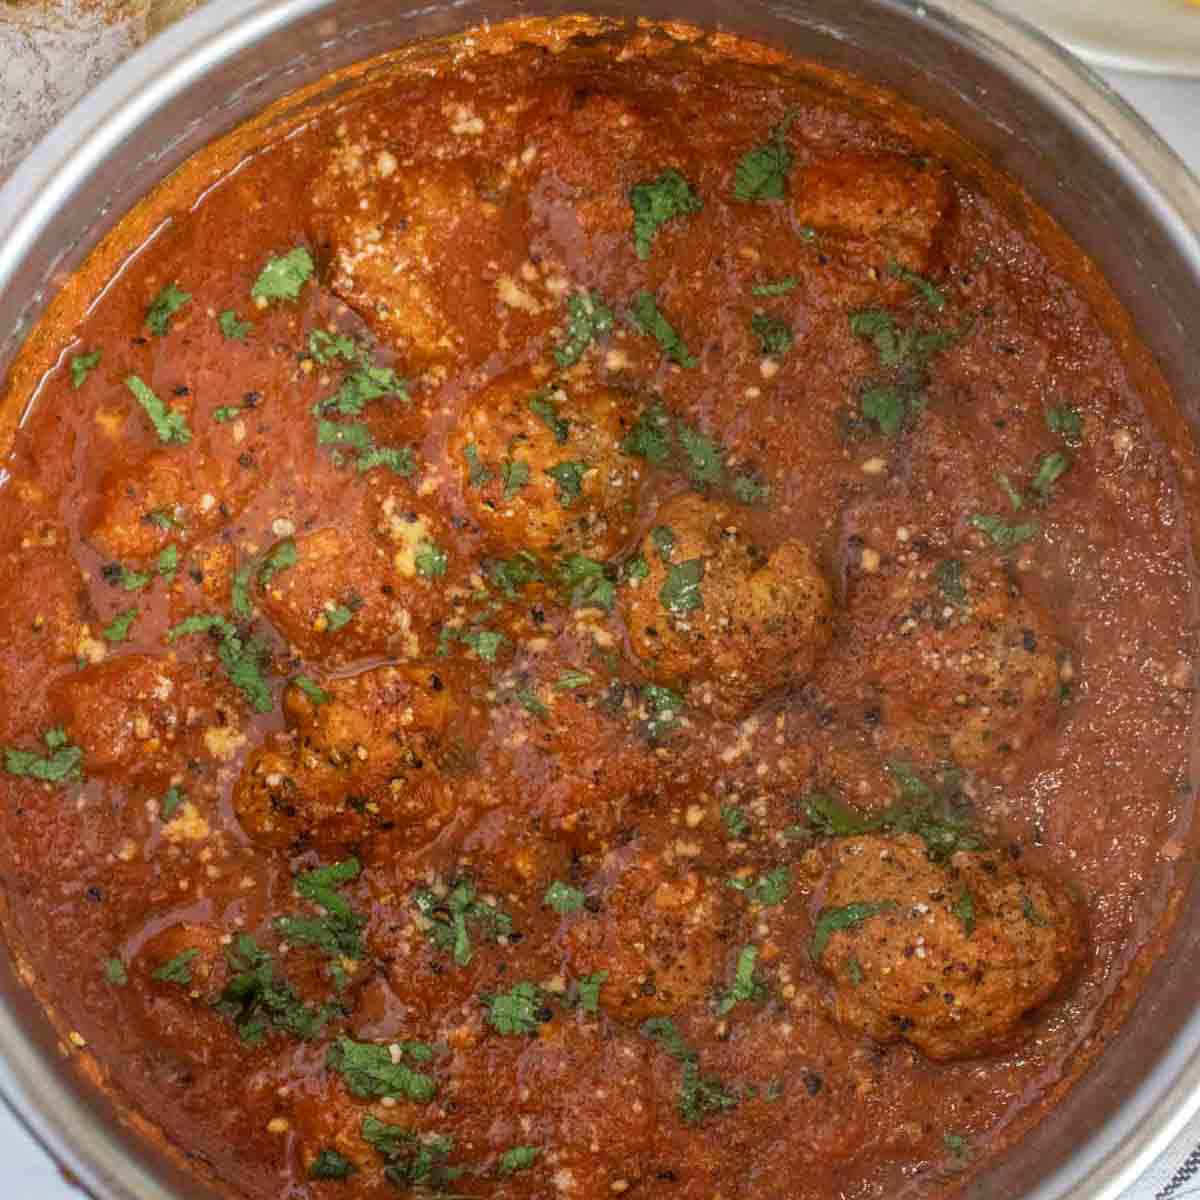 The cooked meatballs in the marinara sauce. 